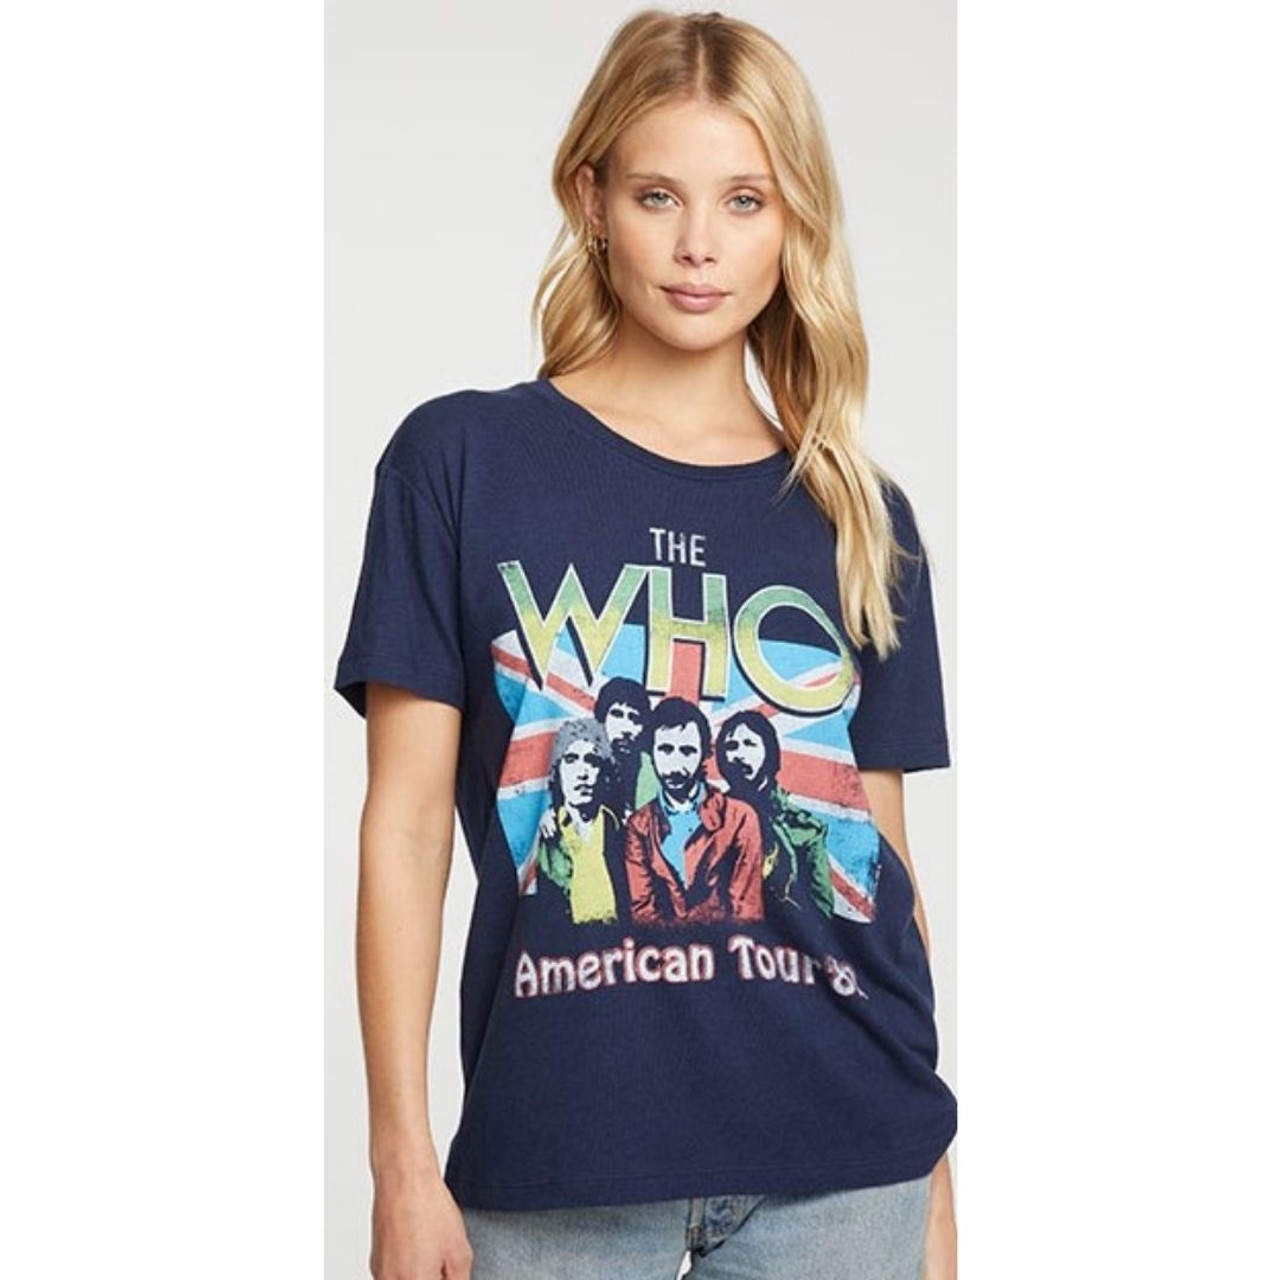 The Who Women's Vintage Fashion Concert T-shirt by Chaser - American Tour  1976. Blue Shirt